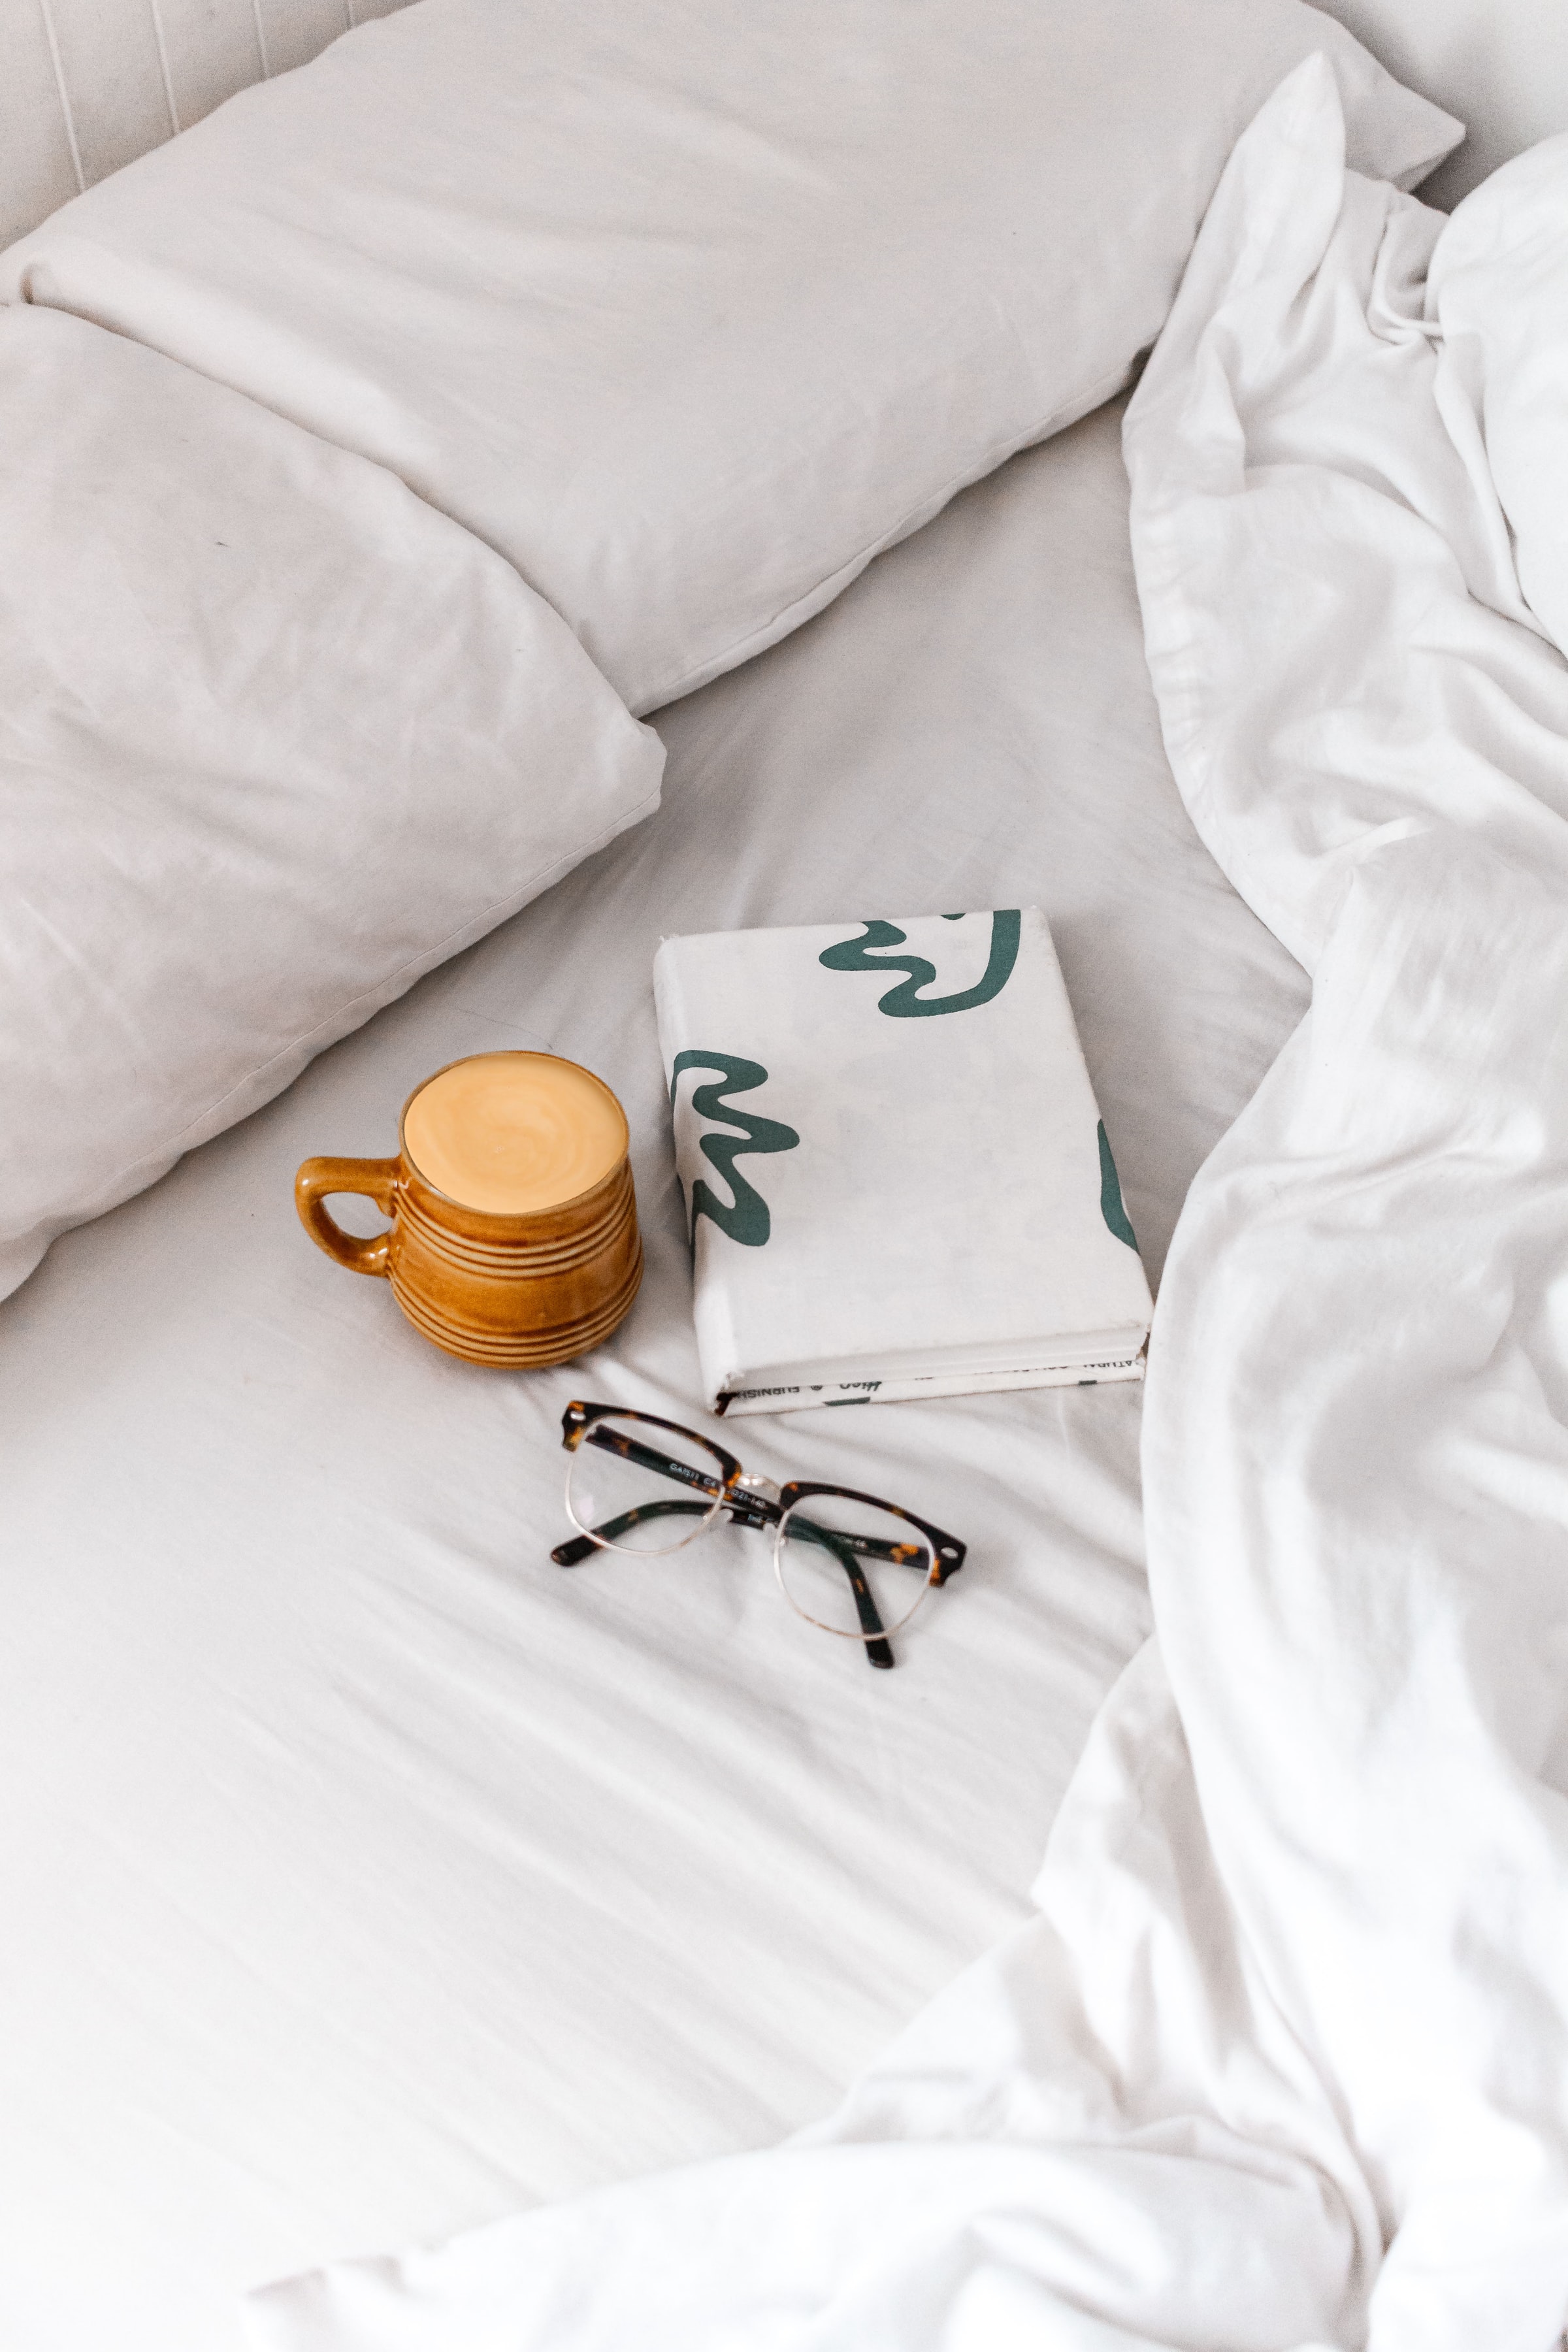 bed, coffee, miscellanea, miscellaneous, cup, book, glasses, spectacles iphone wallpaper